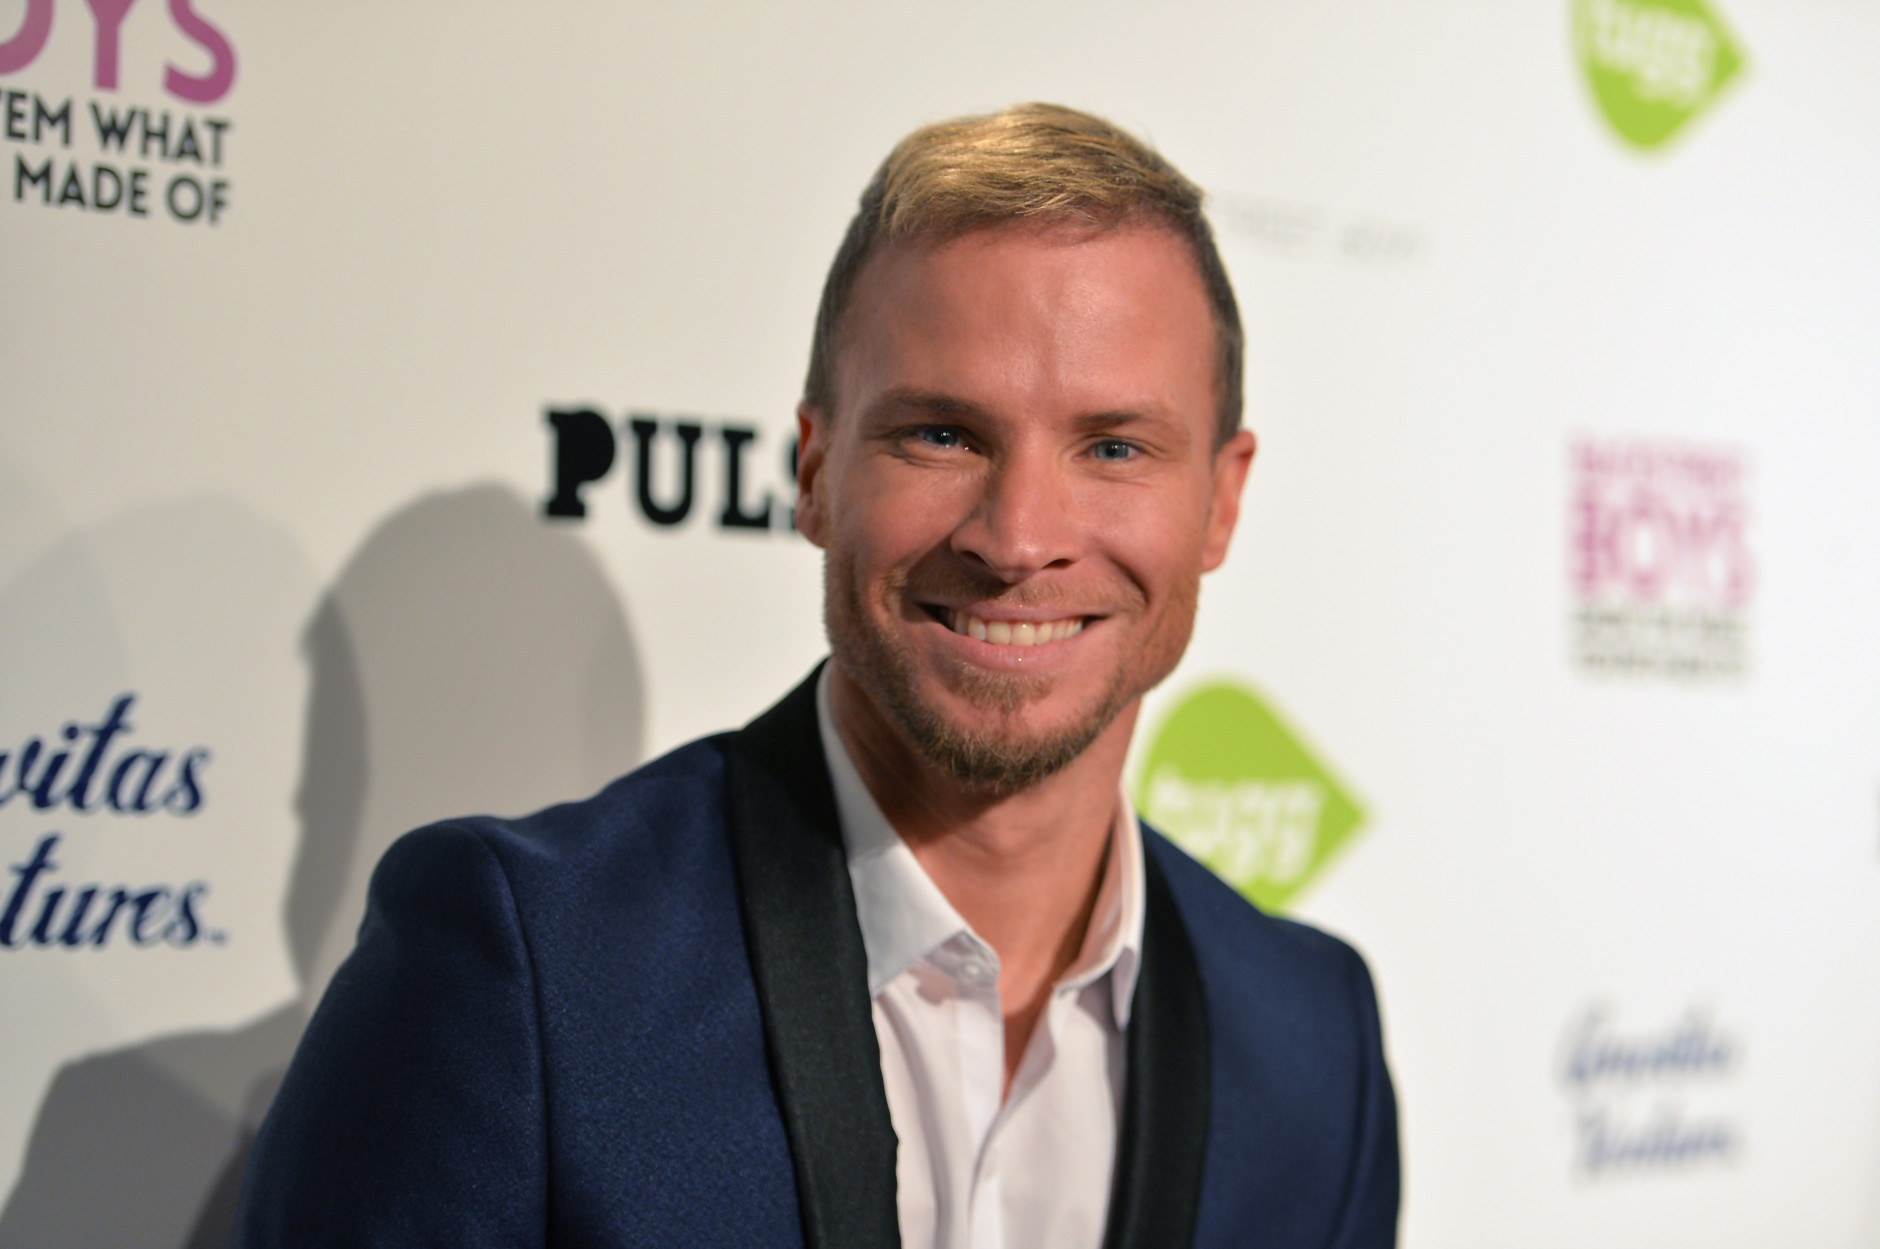  Singer Briean Littrell attends the premiere of Gravitas Ventures' 'Backstreet Boys: Show 'Em What You're Made Of' at on January 29, 2015 in Hollywood, California. (Photo by Alberto E. Rodriguez/Getty Images)